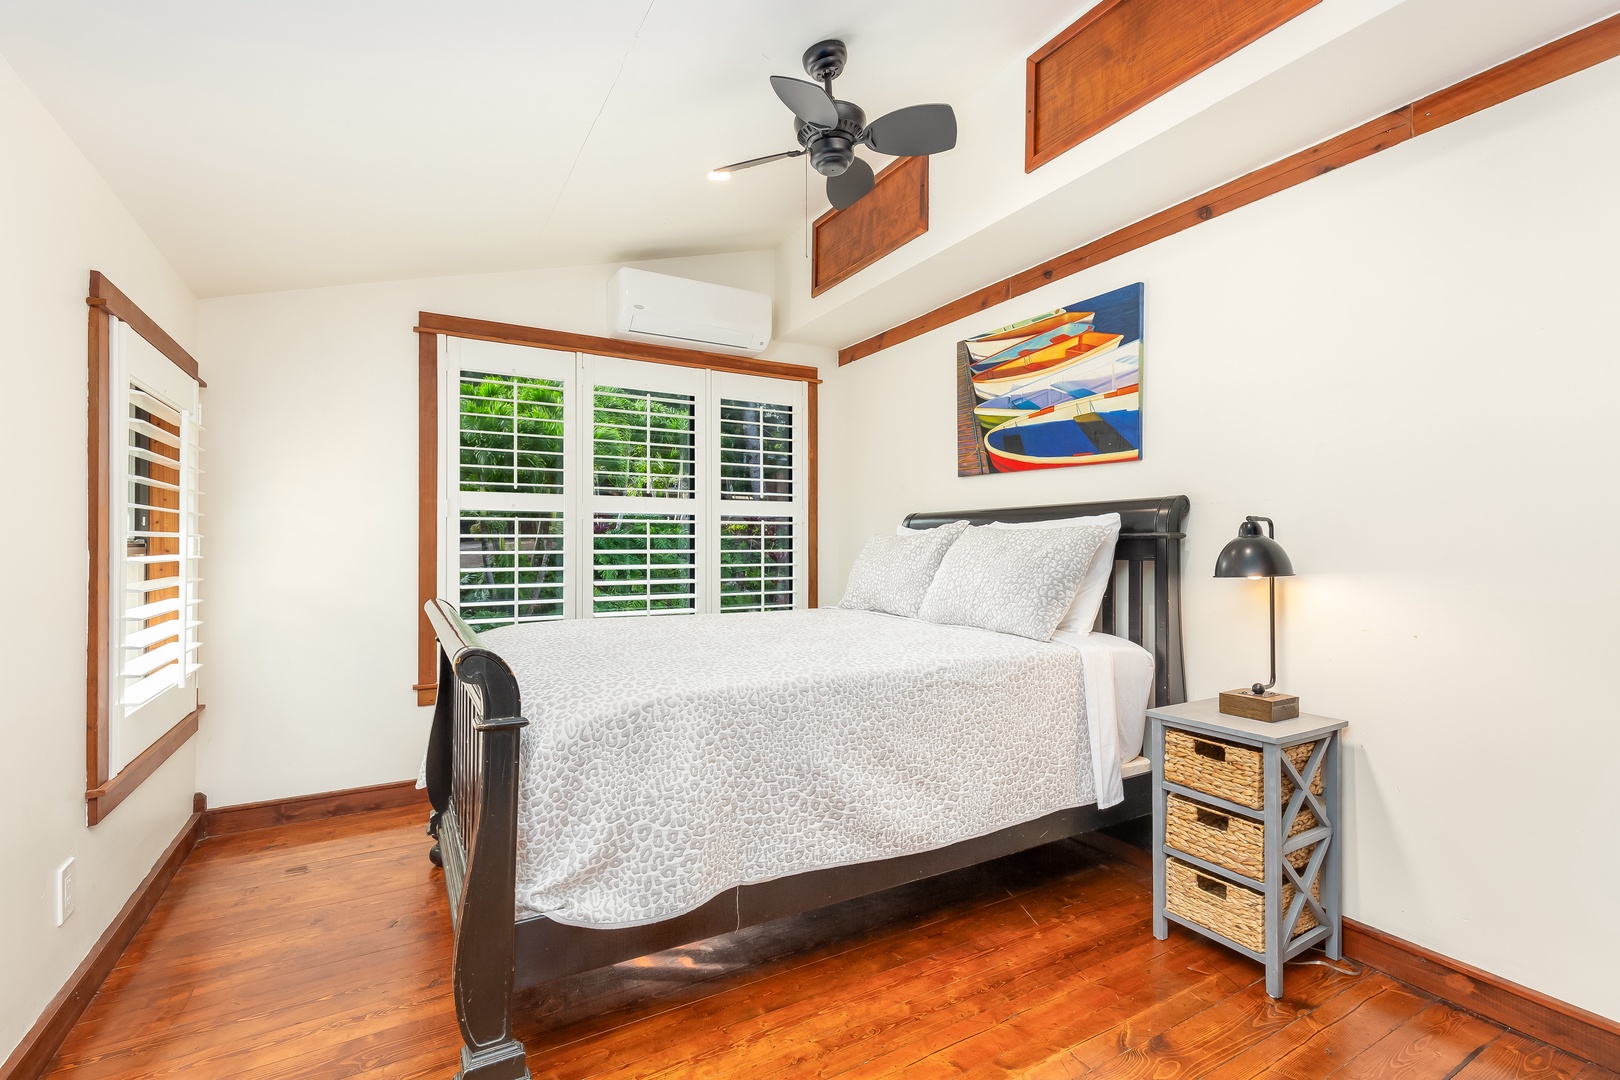 Haleiwa Vacation Rentals, Mele Makana - Guest bedroom 4 is equipped with central A/C for a comfortable night's sleep